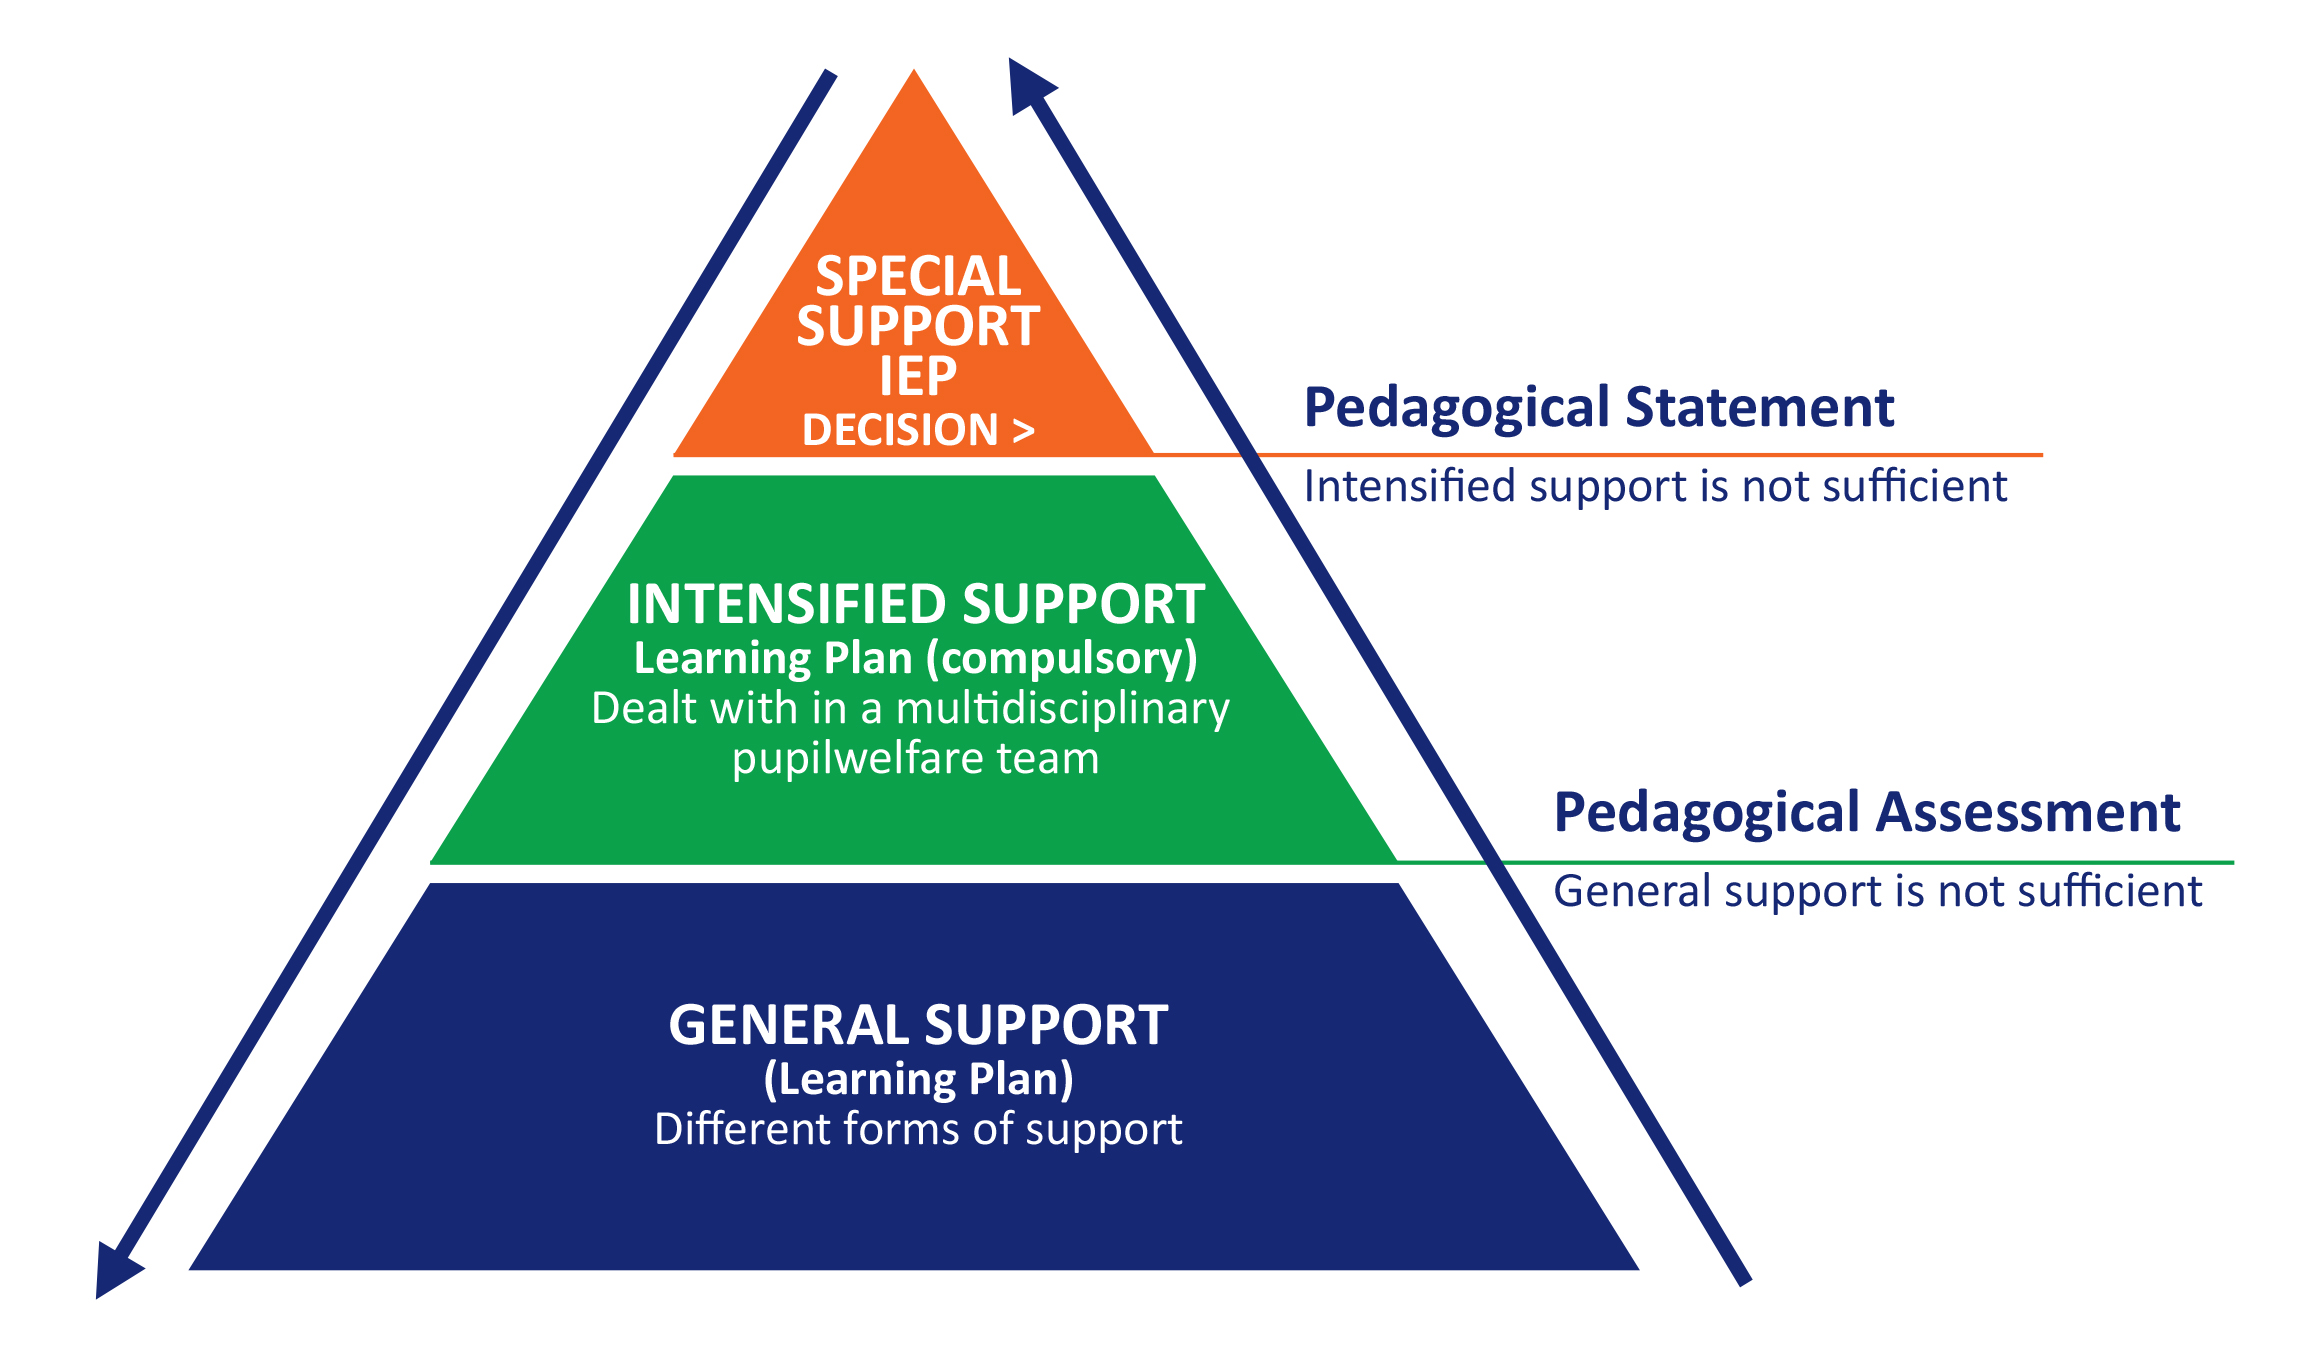 The diagram illustrates the types of support available in educational settings in Finland. The graphic layout is presented as a pyramid. There are three different levels of support from top to bottom: •	Special support is based on a decision and includes an IEP.  •	Intensified support includes a learning plan which is compulsory. A multi-disciplinary pupil welfare team deals with the support. A pedagogical statement is available when intensified support is not sufficient. •	General support might include a l